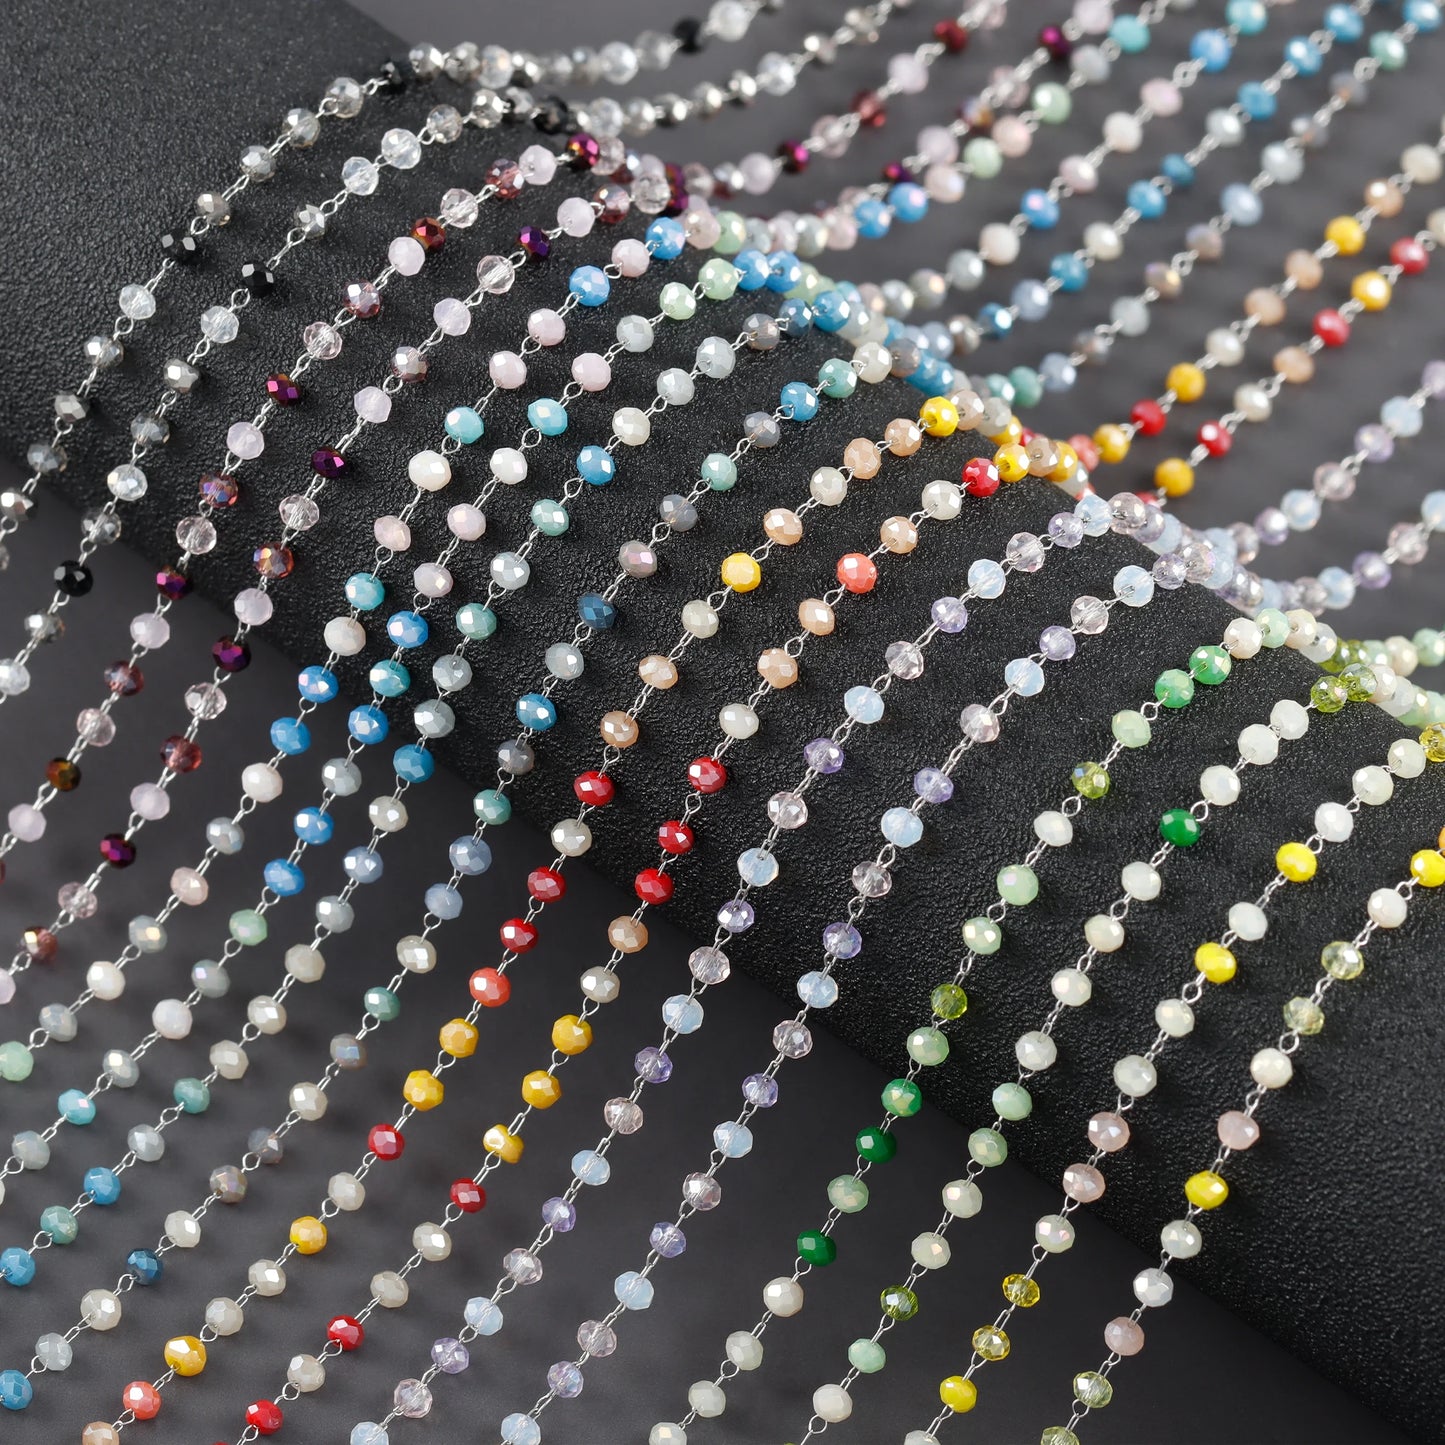 GUFEATHER C252,diy chain,stainless steel,plastic beads,jewelry findings,charms,jewelry making,diy bracelet necklace,1m/lot